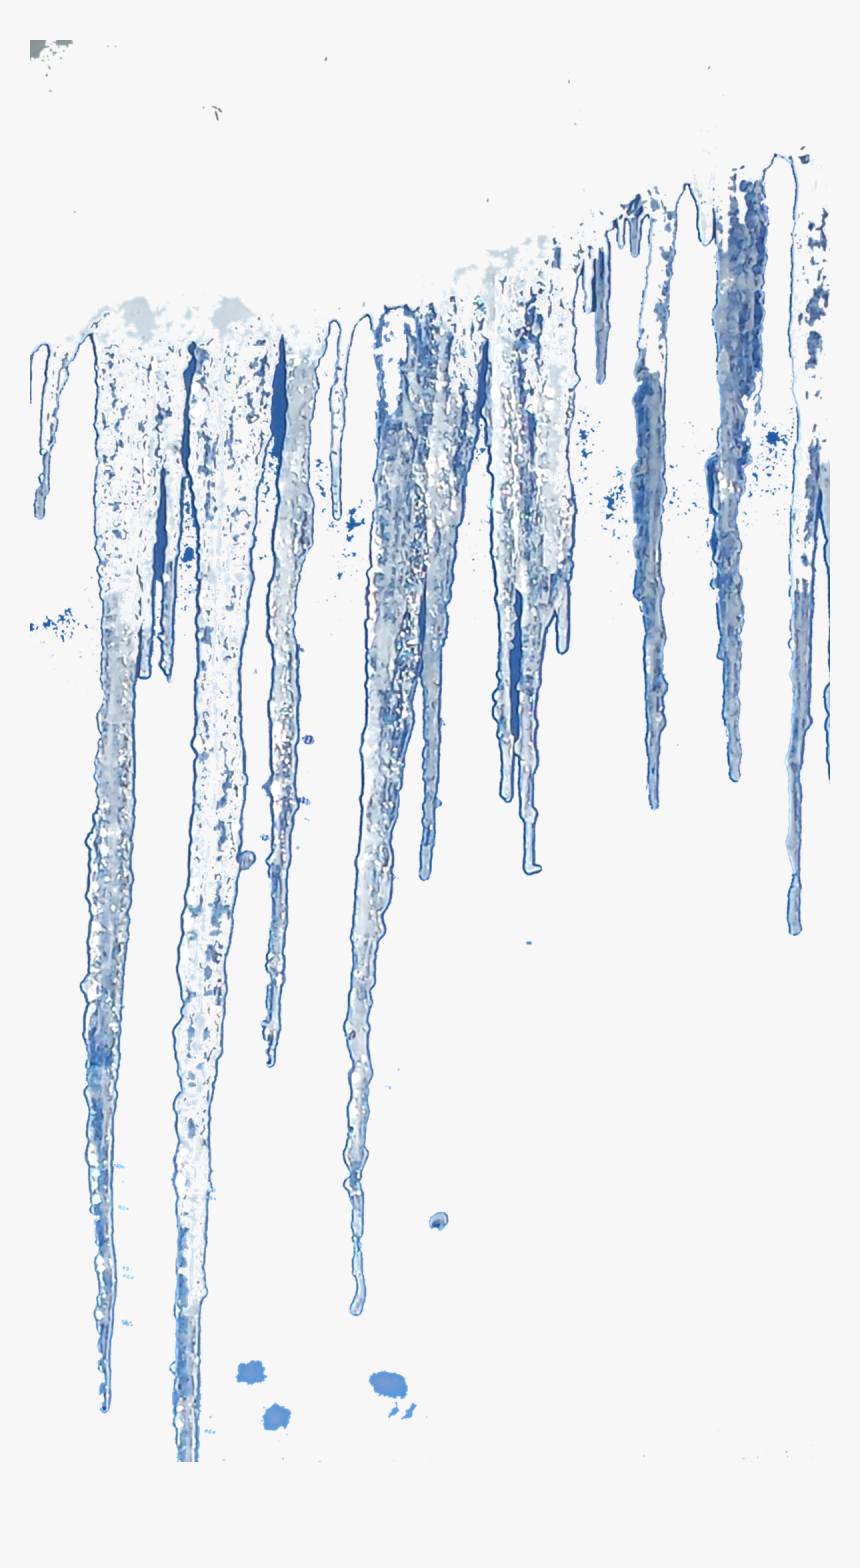 Icicles Png Image File - Icicle, Transparent Png, Free Download